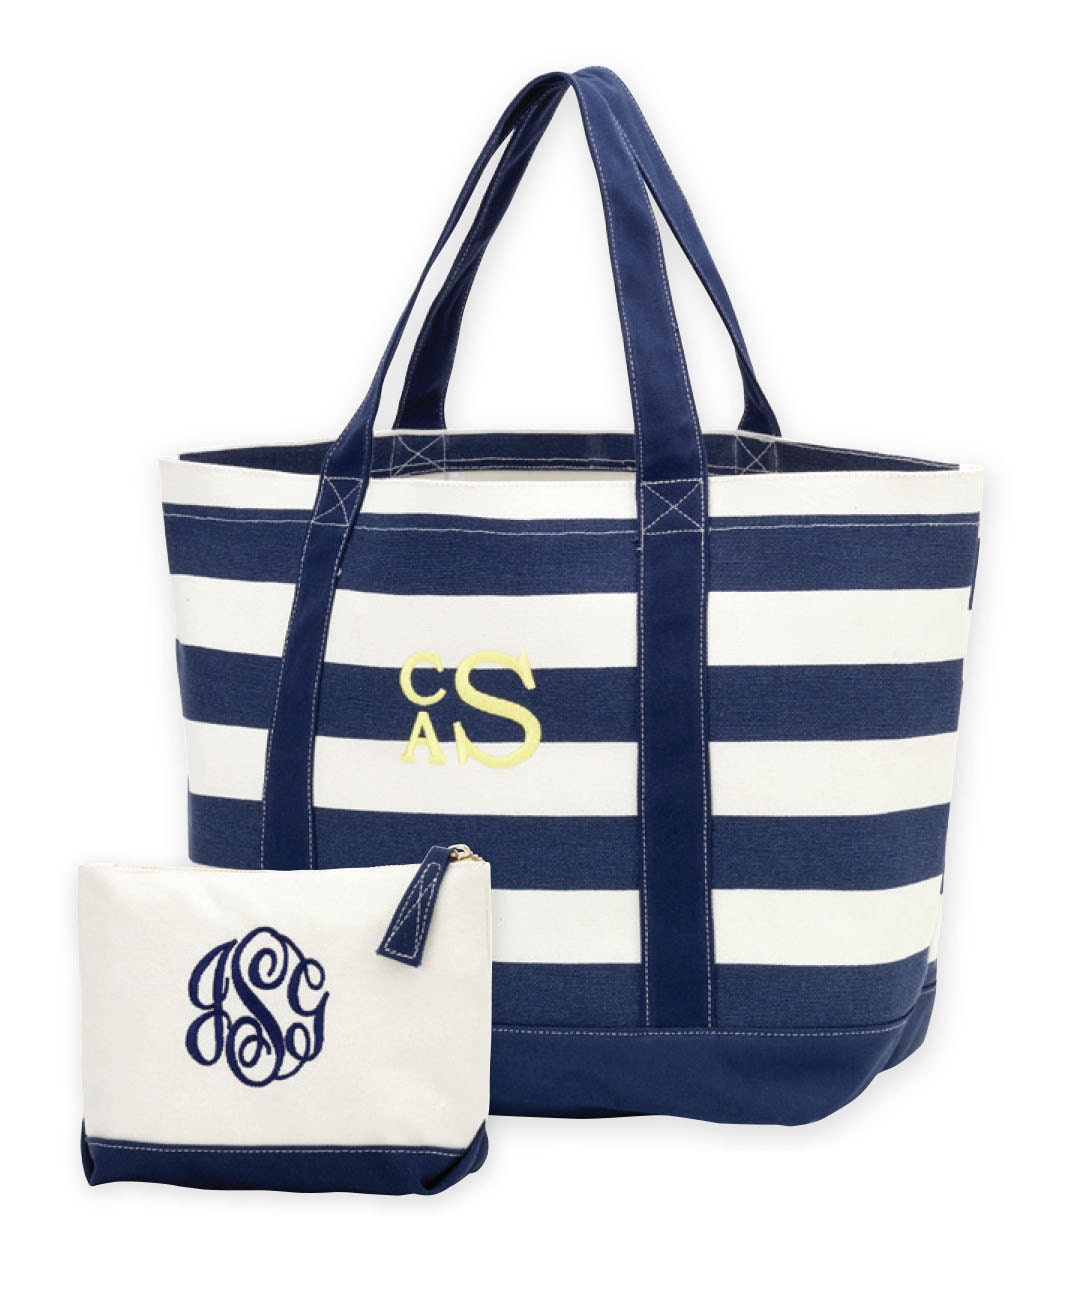 Canvas Tote Bag and cosmetic bag set monogram by PricelessKids